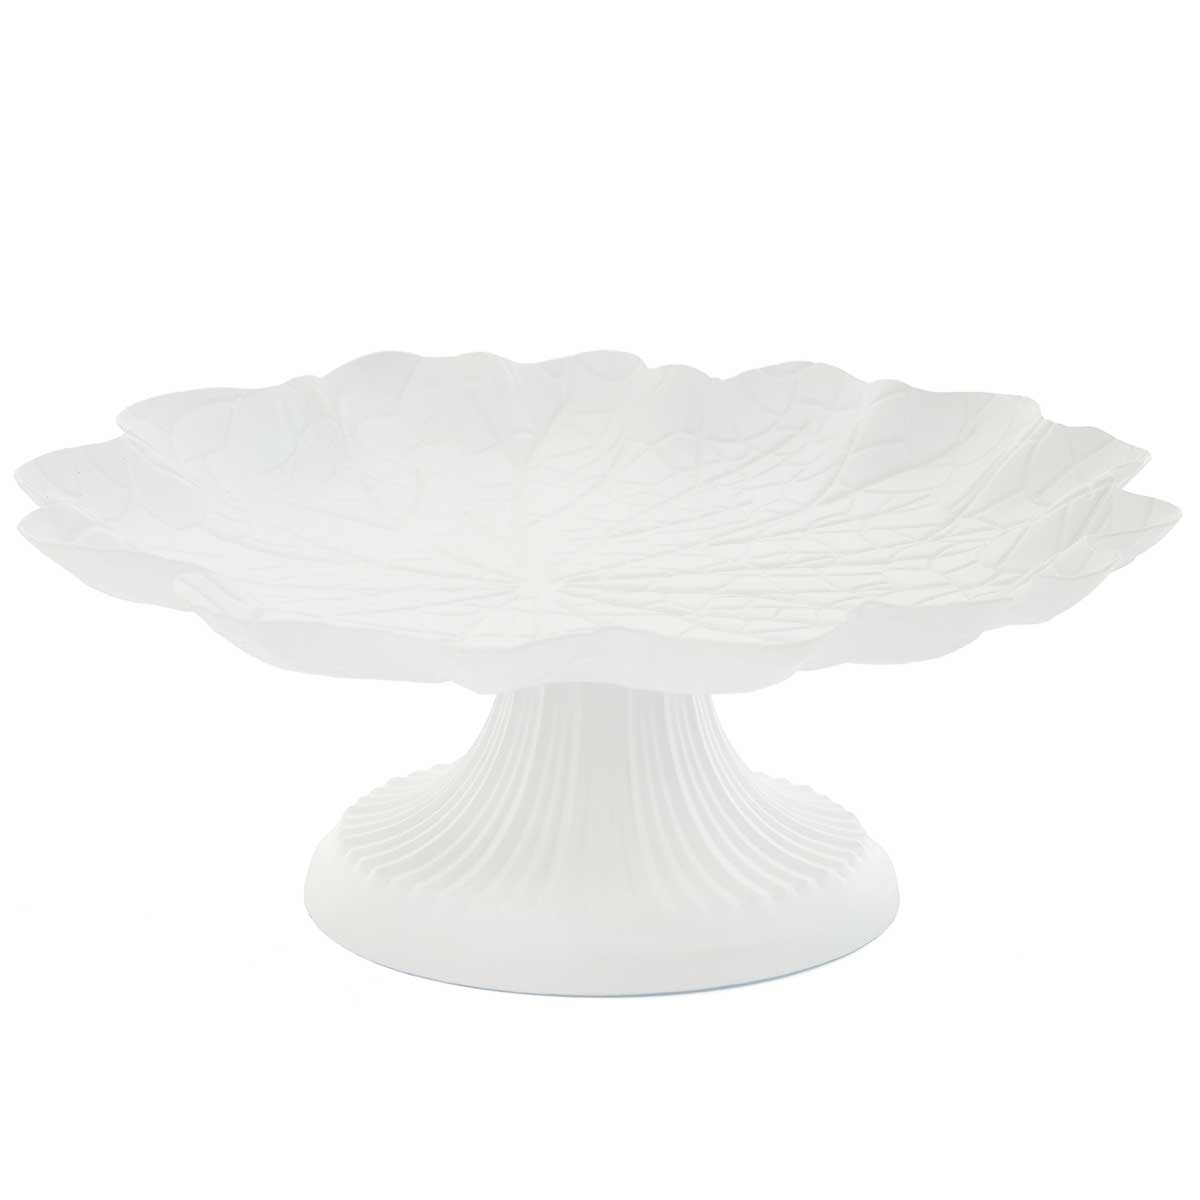 DISPLAY TRAY WATERLILY 10IN X 4IN MATTE WHITE METAL